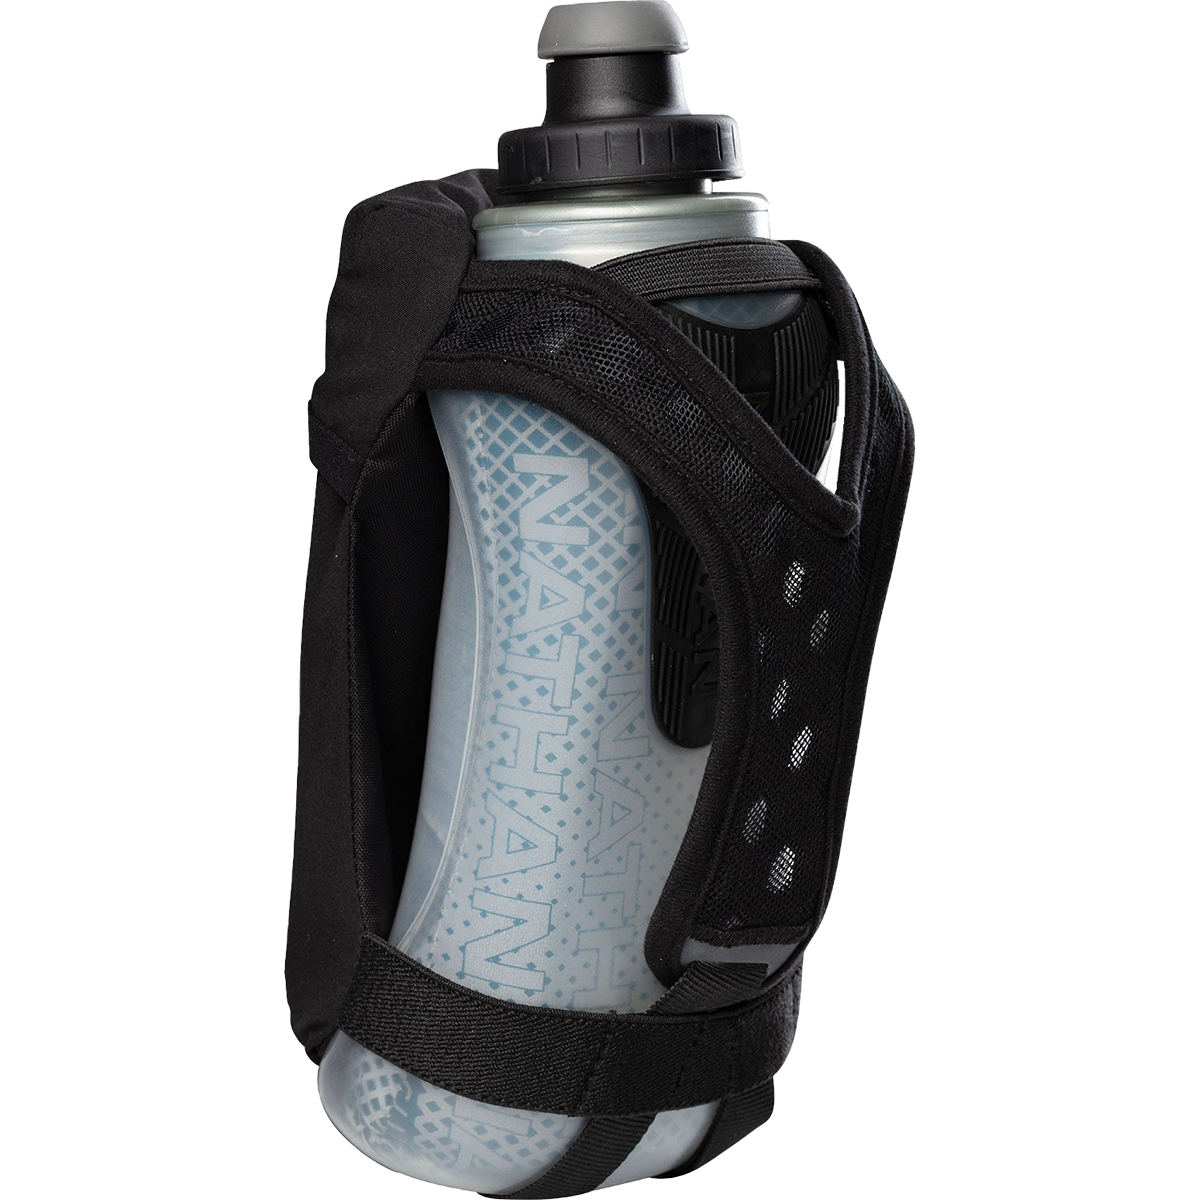 QuickSqueeze View 18 oz Insulated Handheld alternate view